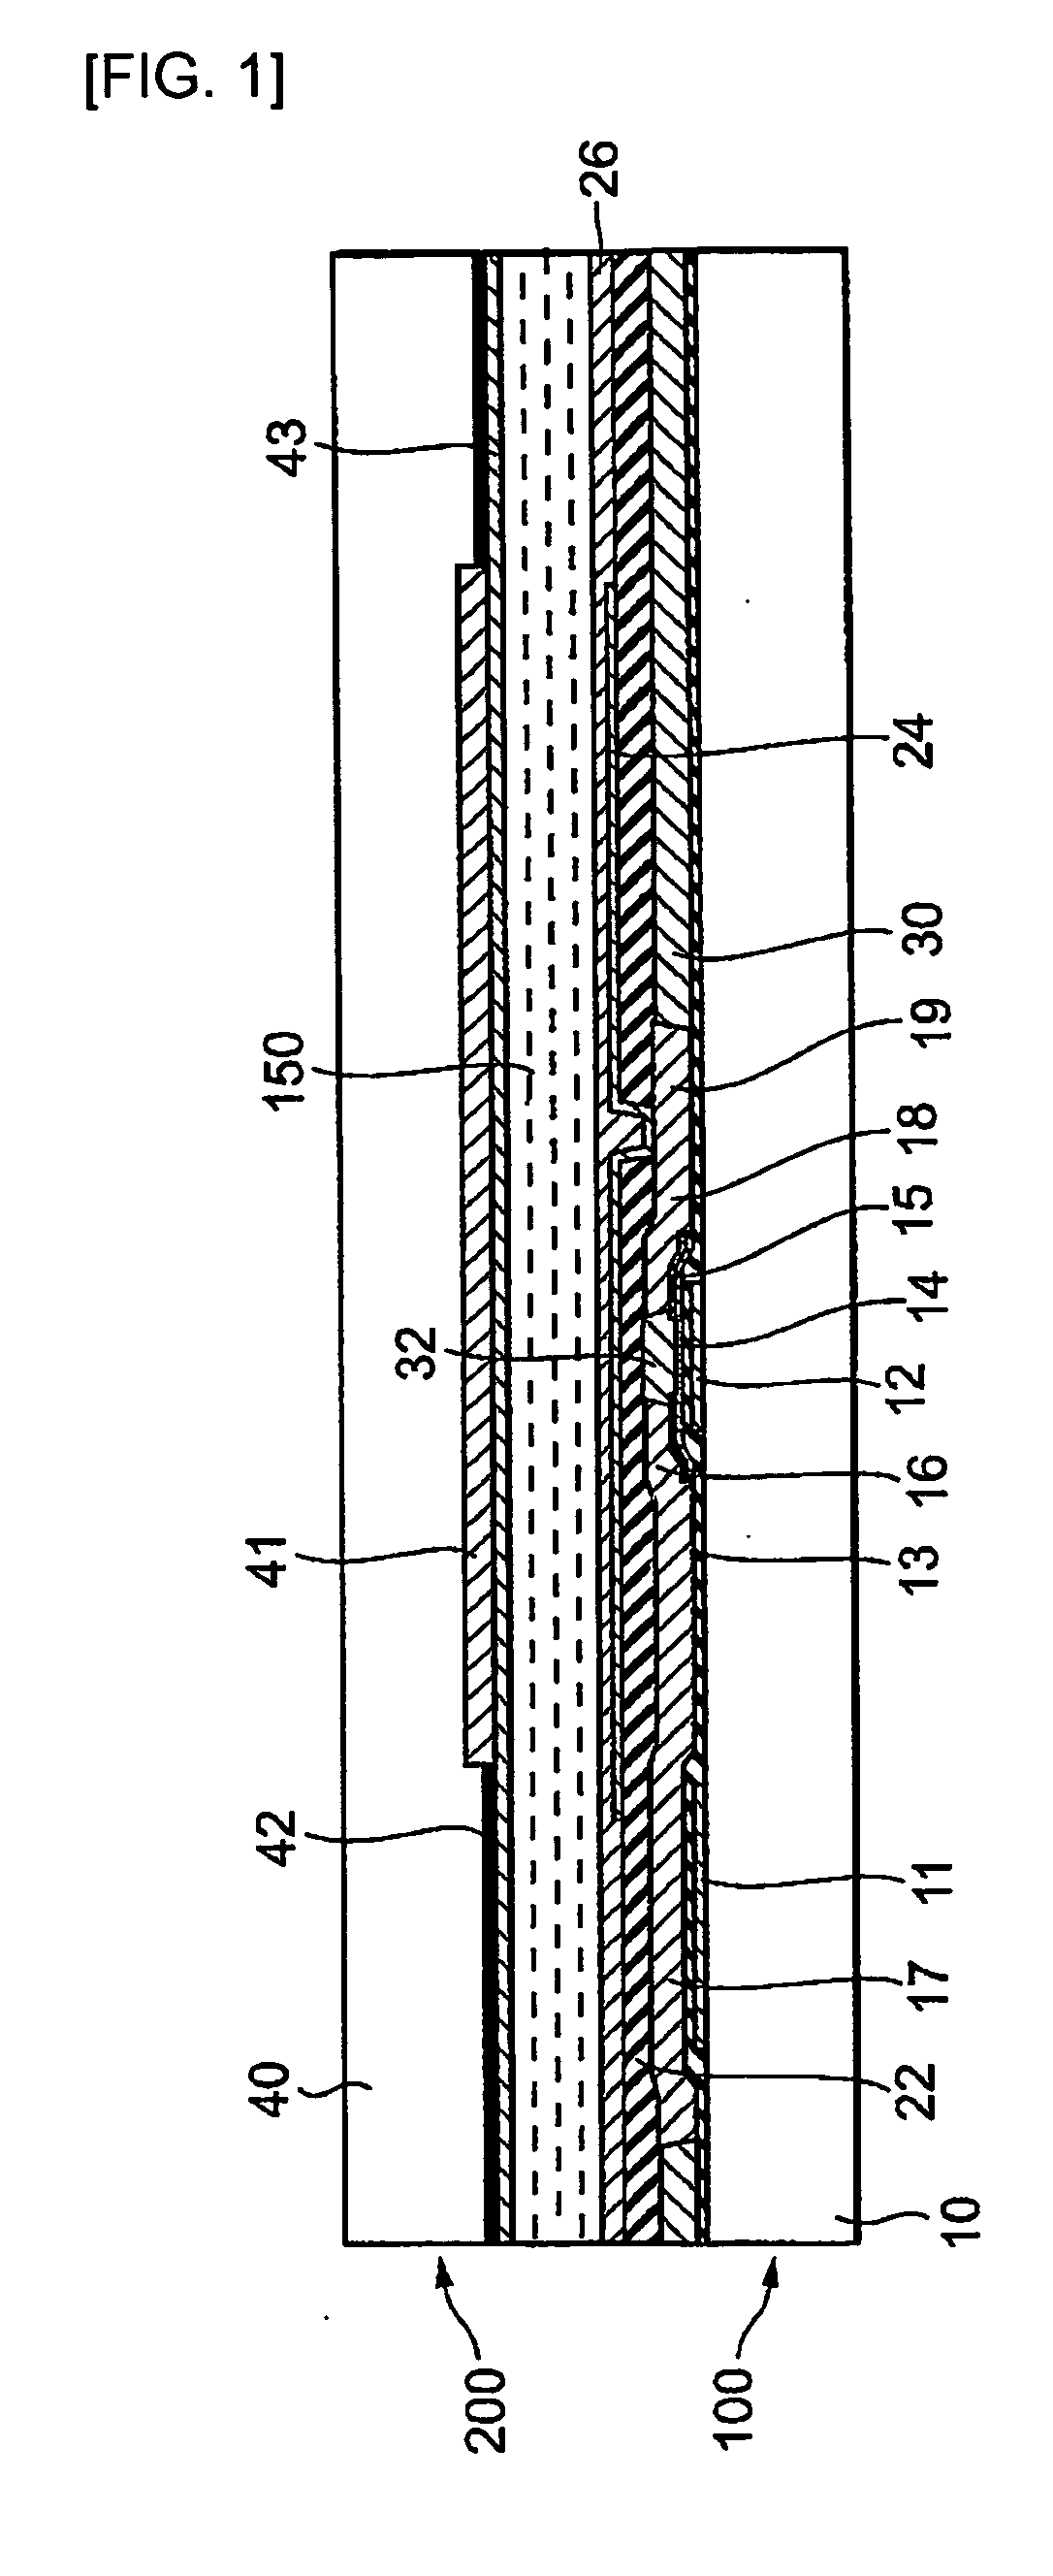 Thin film transistor integrated circuit device, active matrix display device, and manufacturing methods of the same